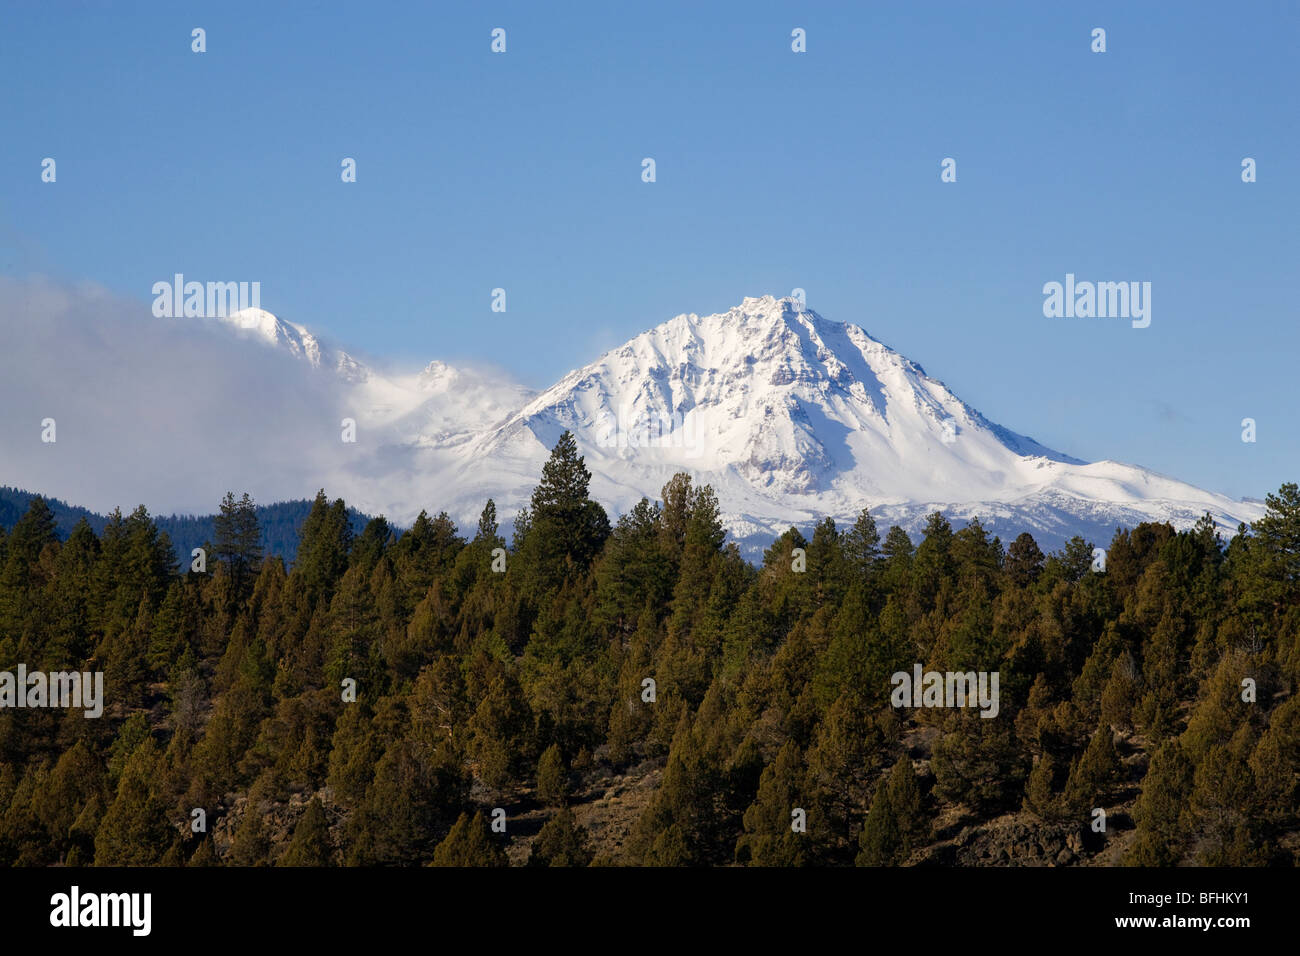 Ponderosa pine and juniper dot the lower slopes of the Cascade Mountains in winter near Bend, Oregon Stock Photo